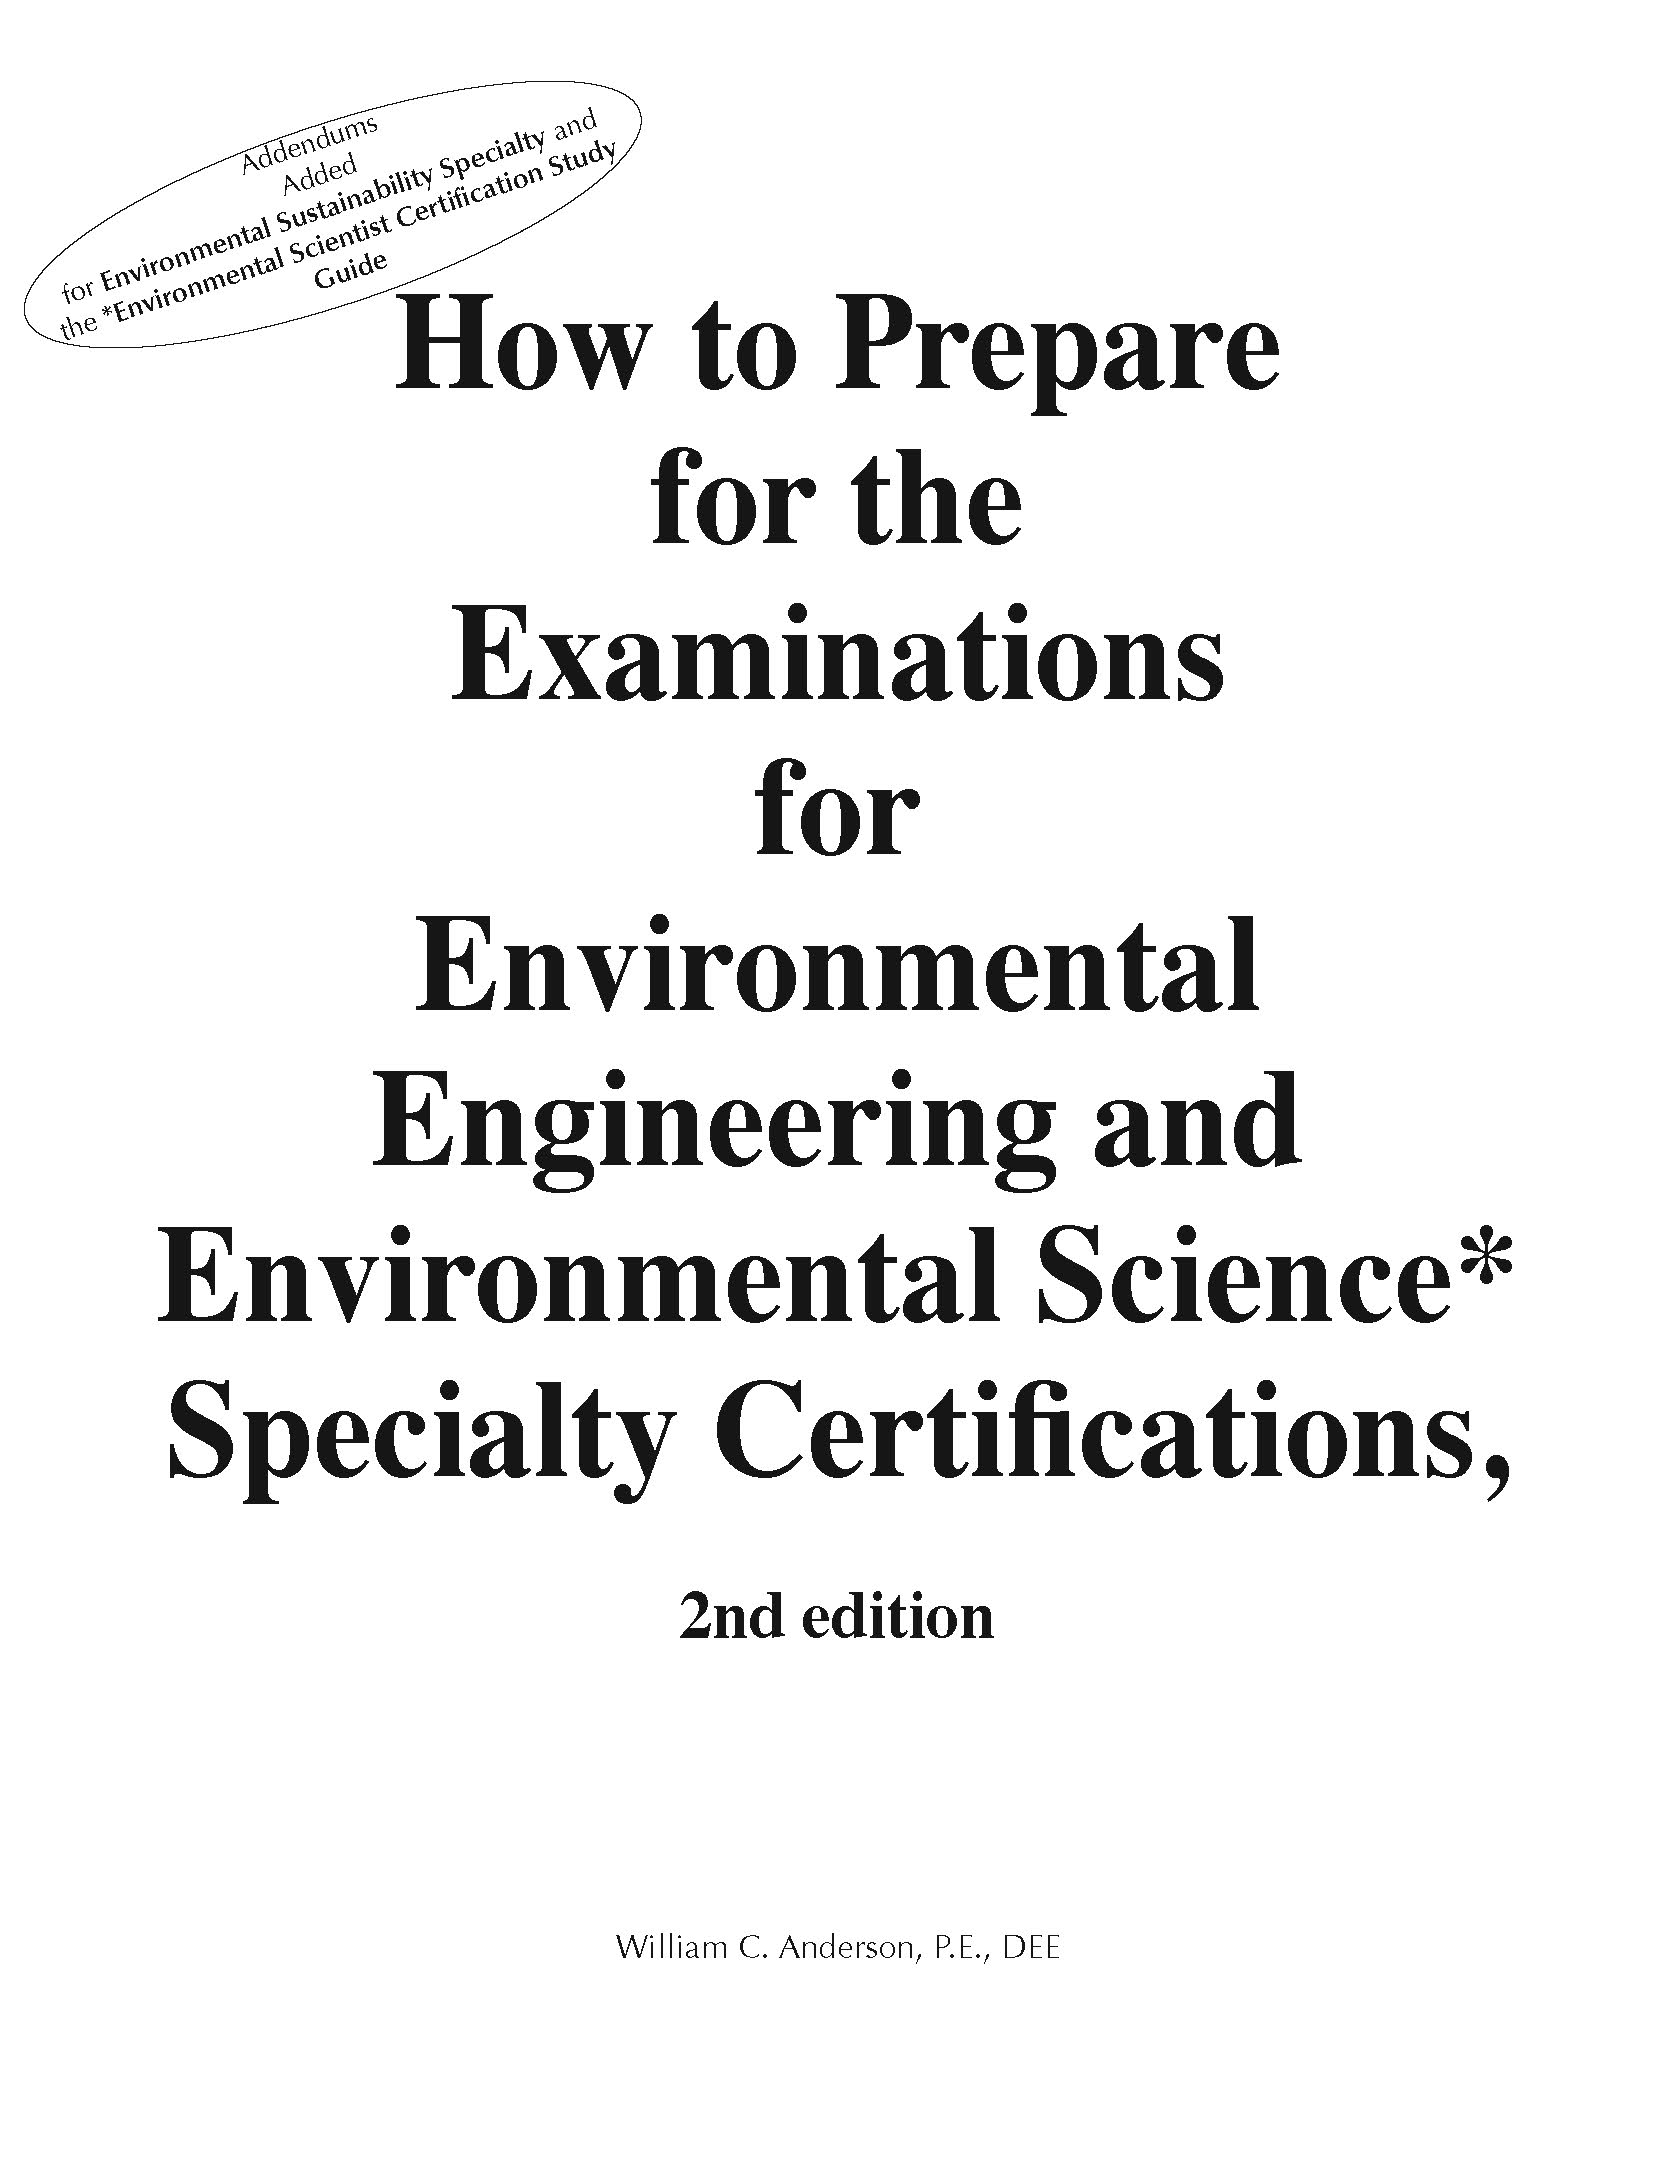 How to Prepare for the Examinations for the BCEE and BCES Specialty Certifications - Digital